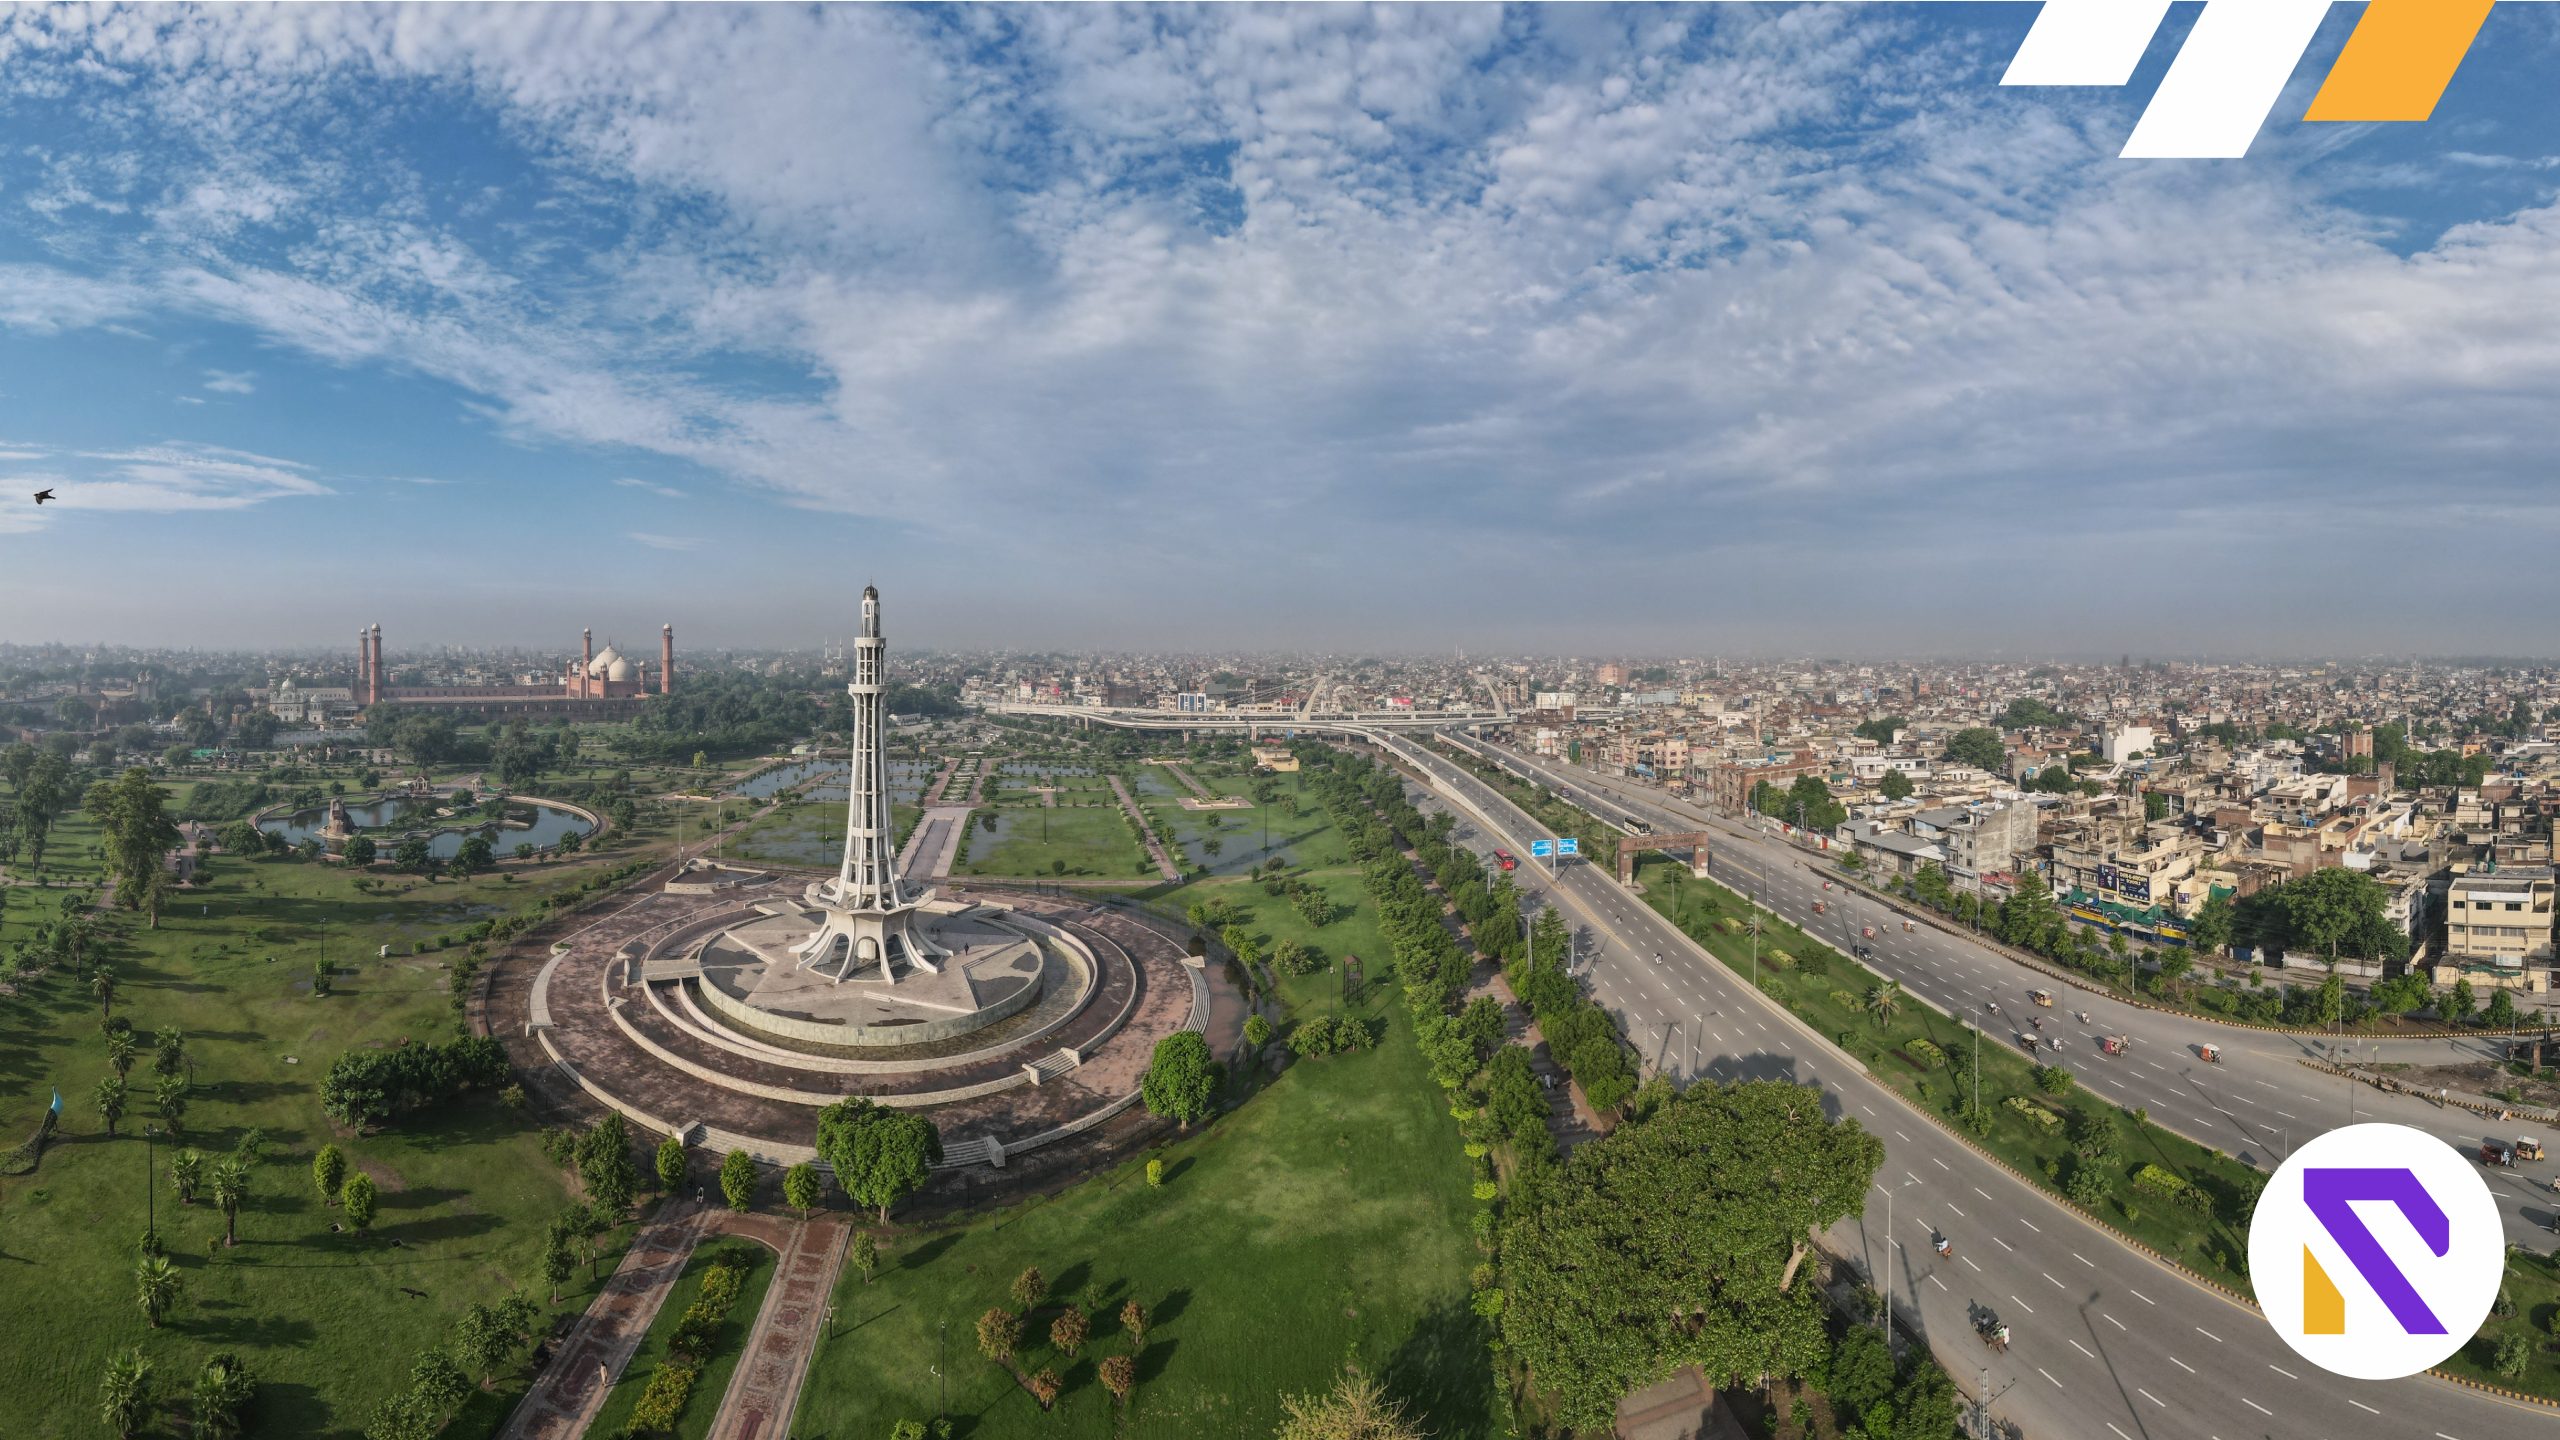 CBD puts Lahore on the map as the first city in Asia to embrace the Blue Road initiative